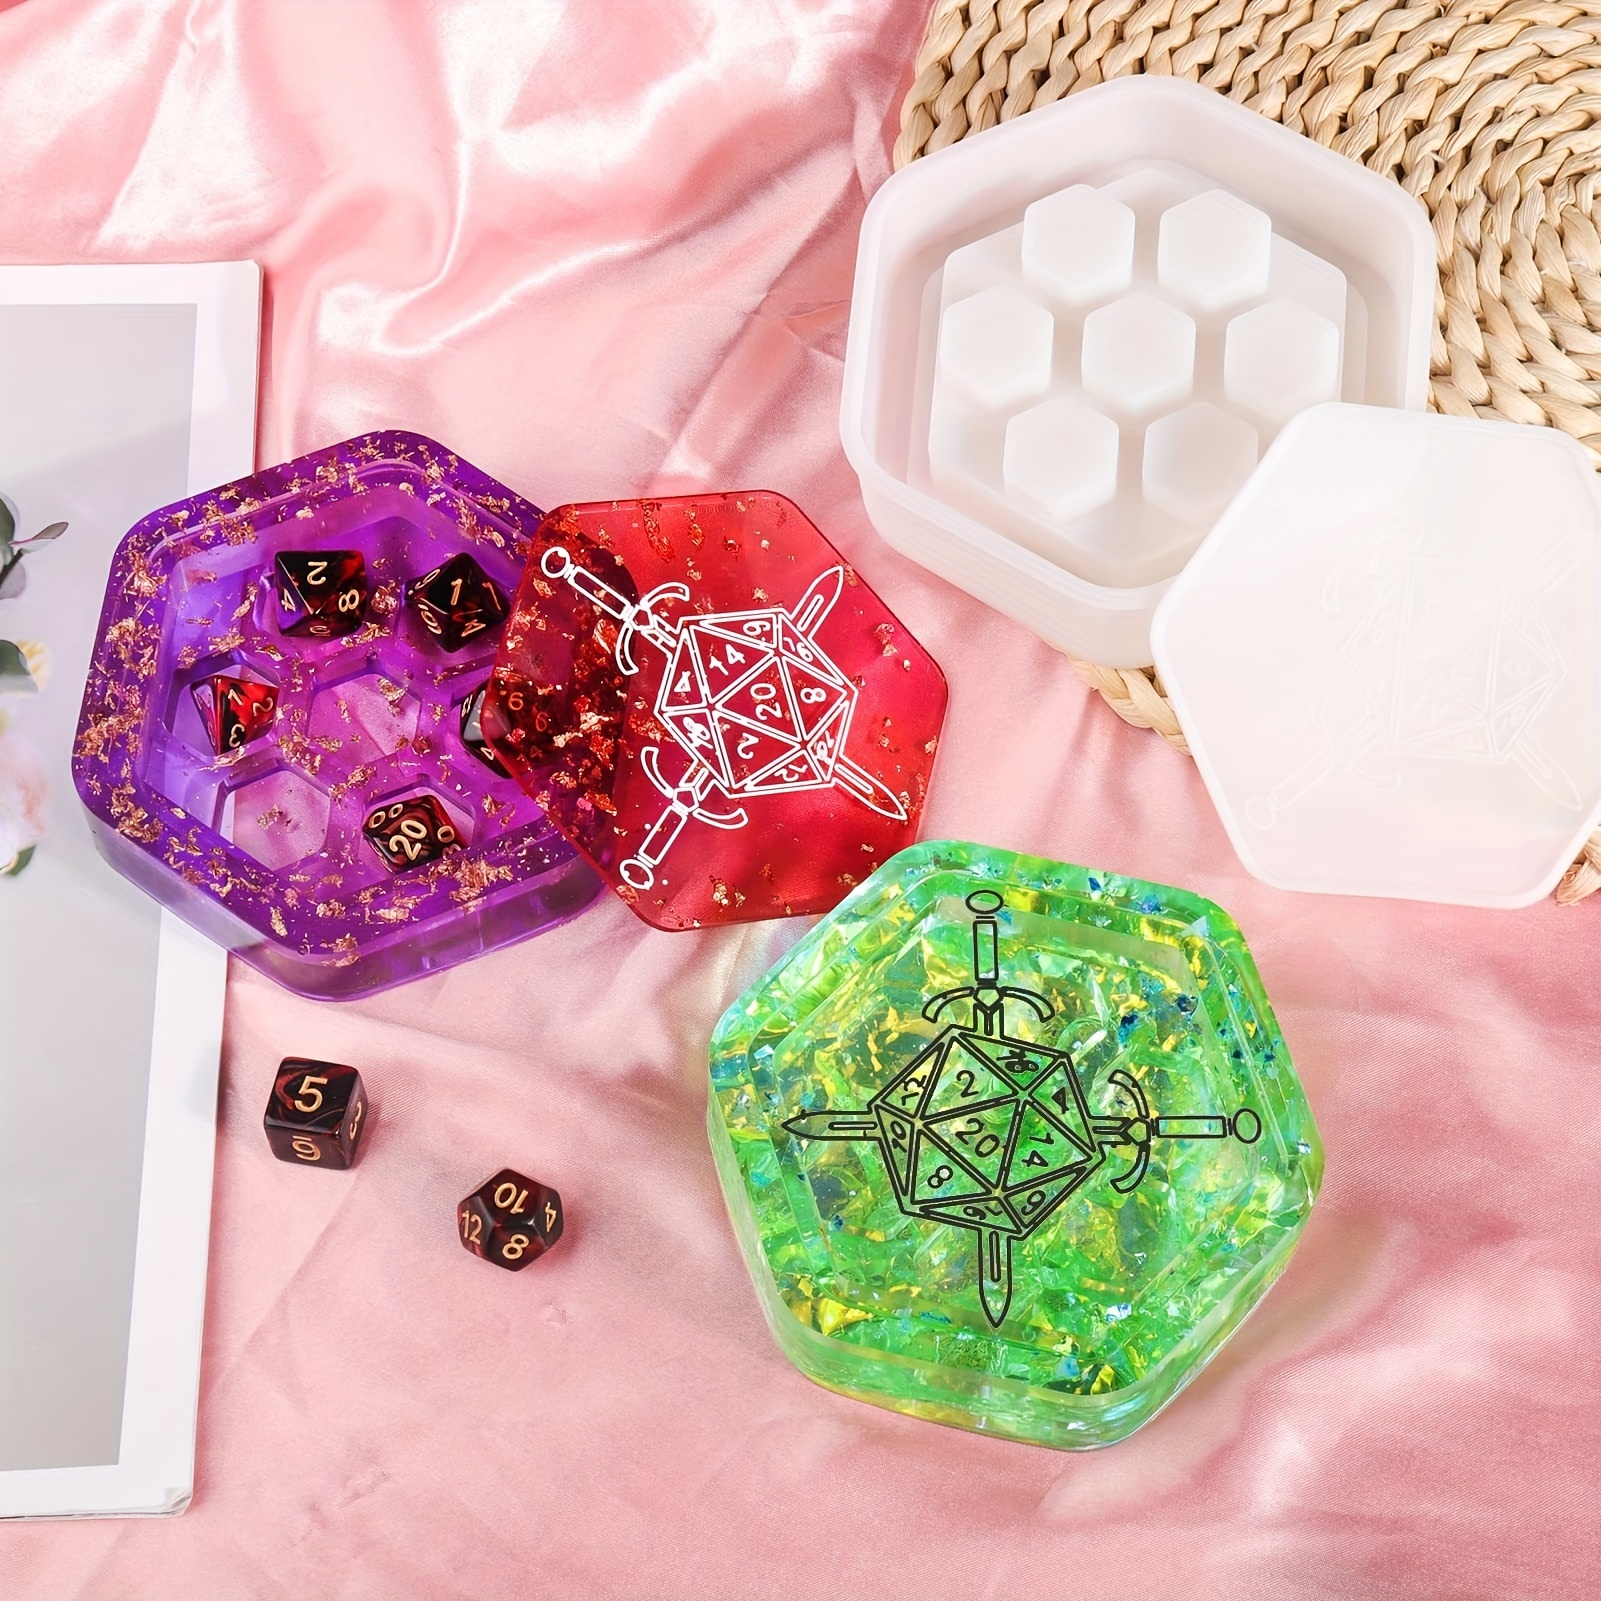 Large Dice Resin Molds, 2 Styles Silicone Dice Mold For Epoxy Resin  Casting, Triangle Hexagonal D20